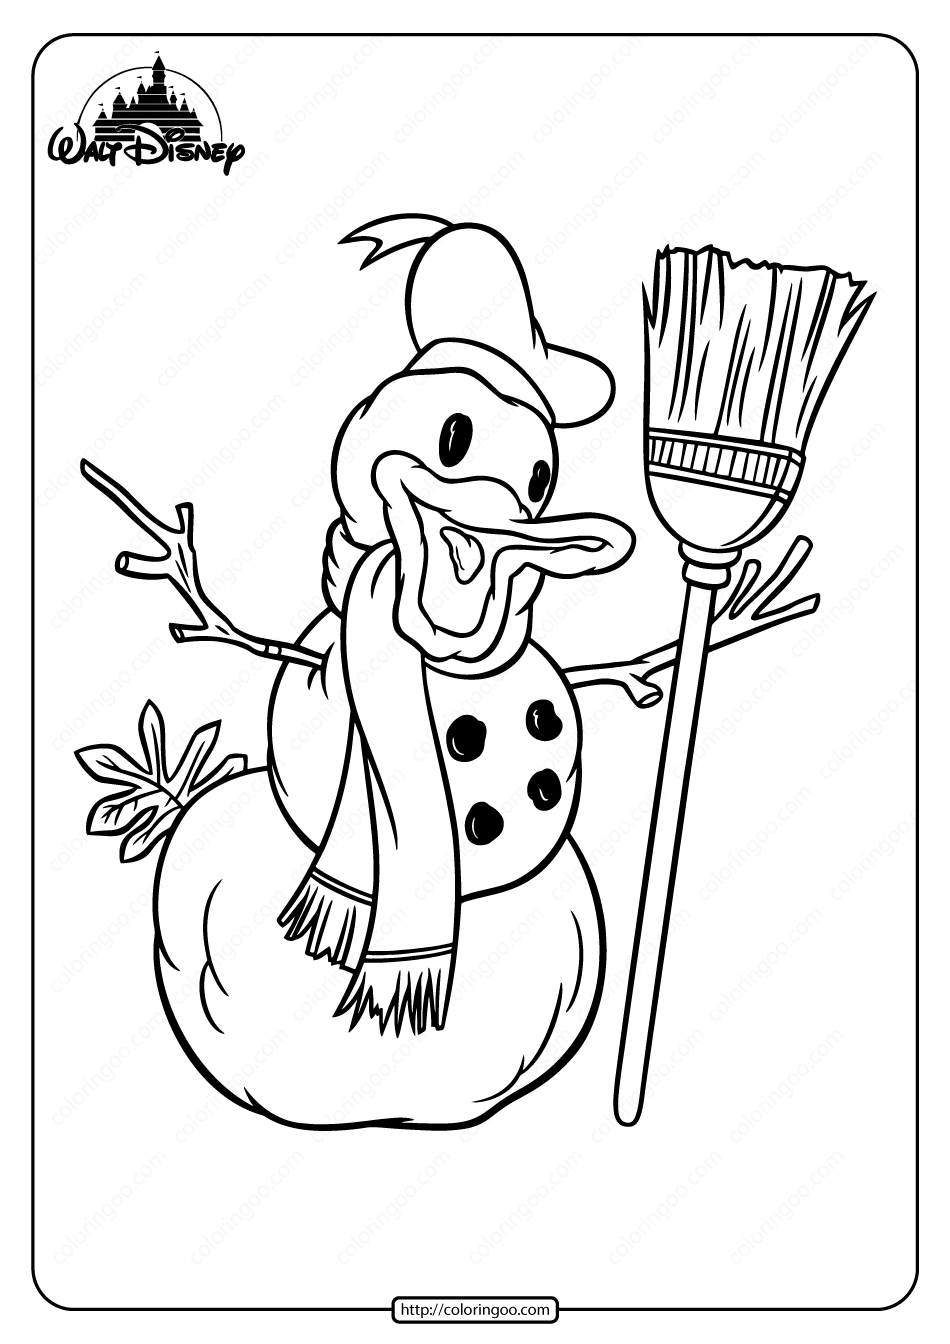 Printable Donald Duck a Snowman Coloring Page